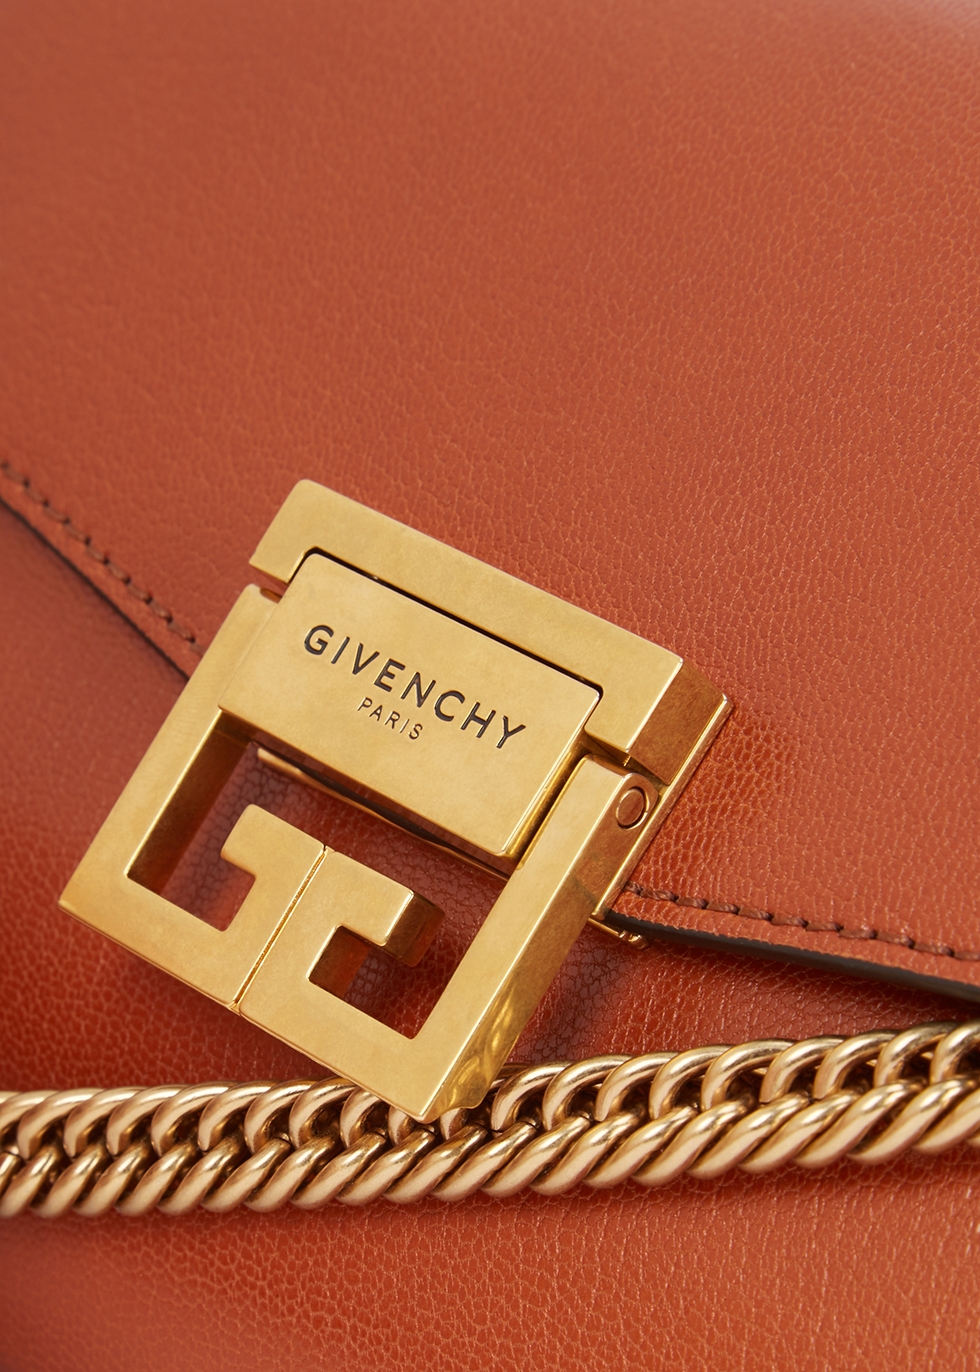 givenchy gv3 red